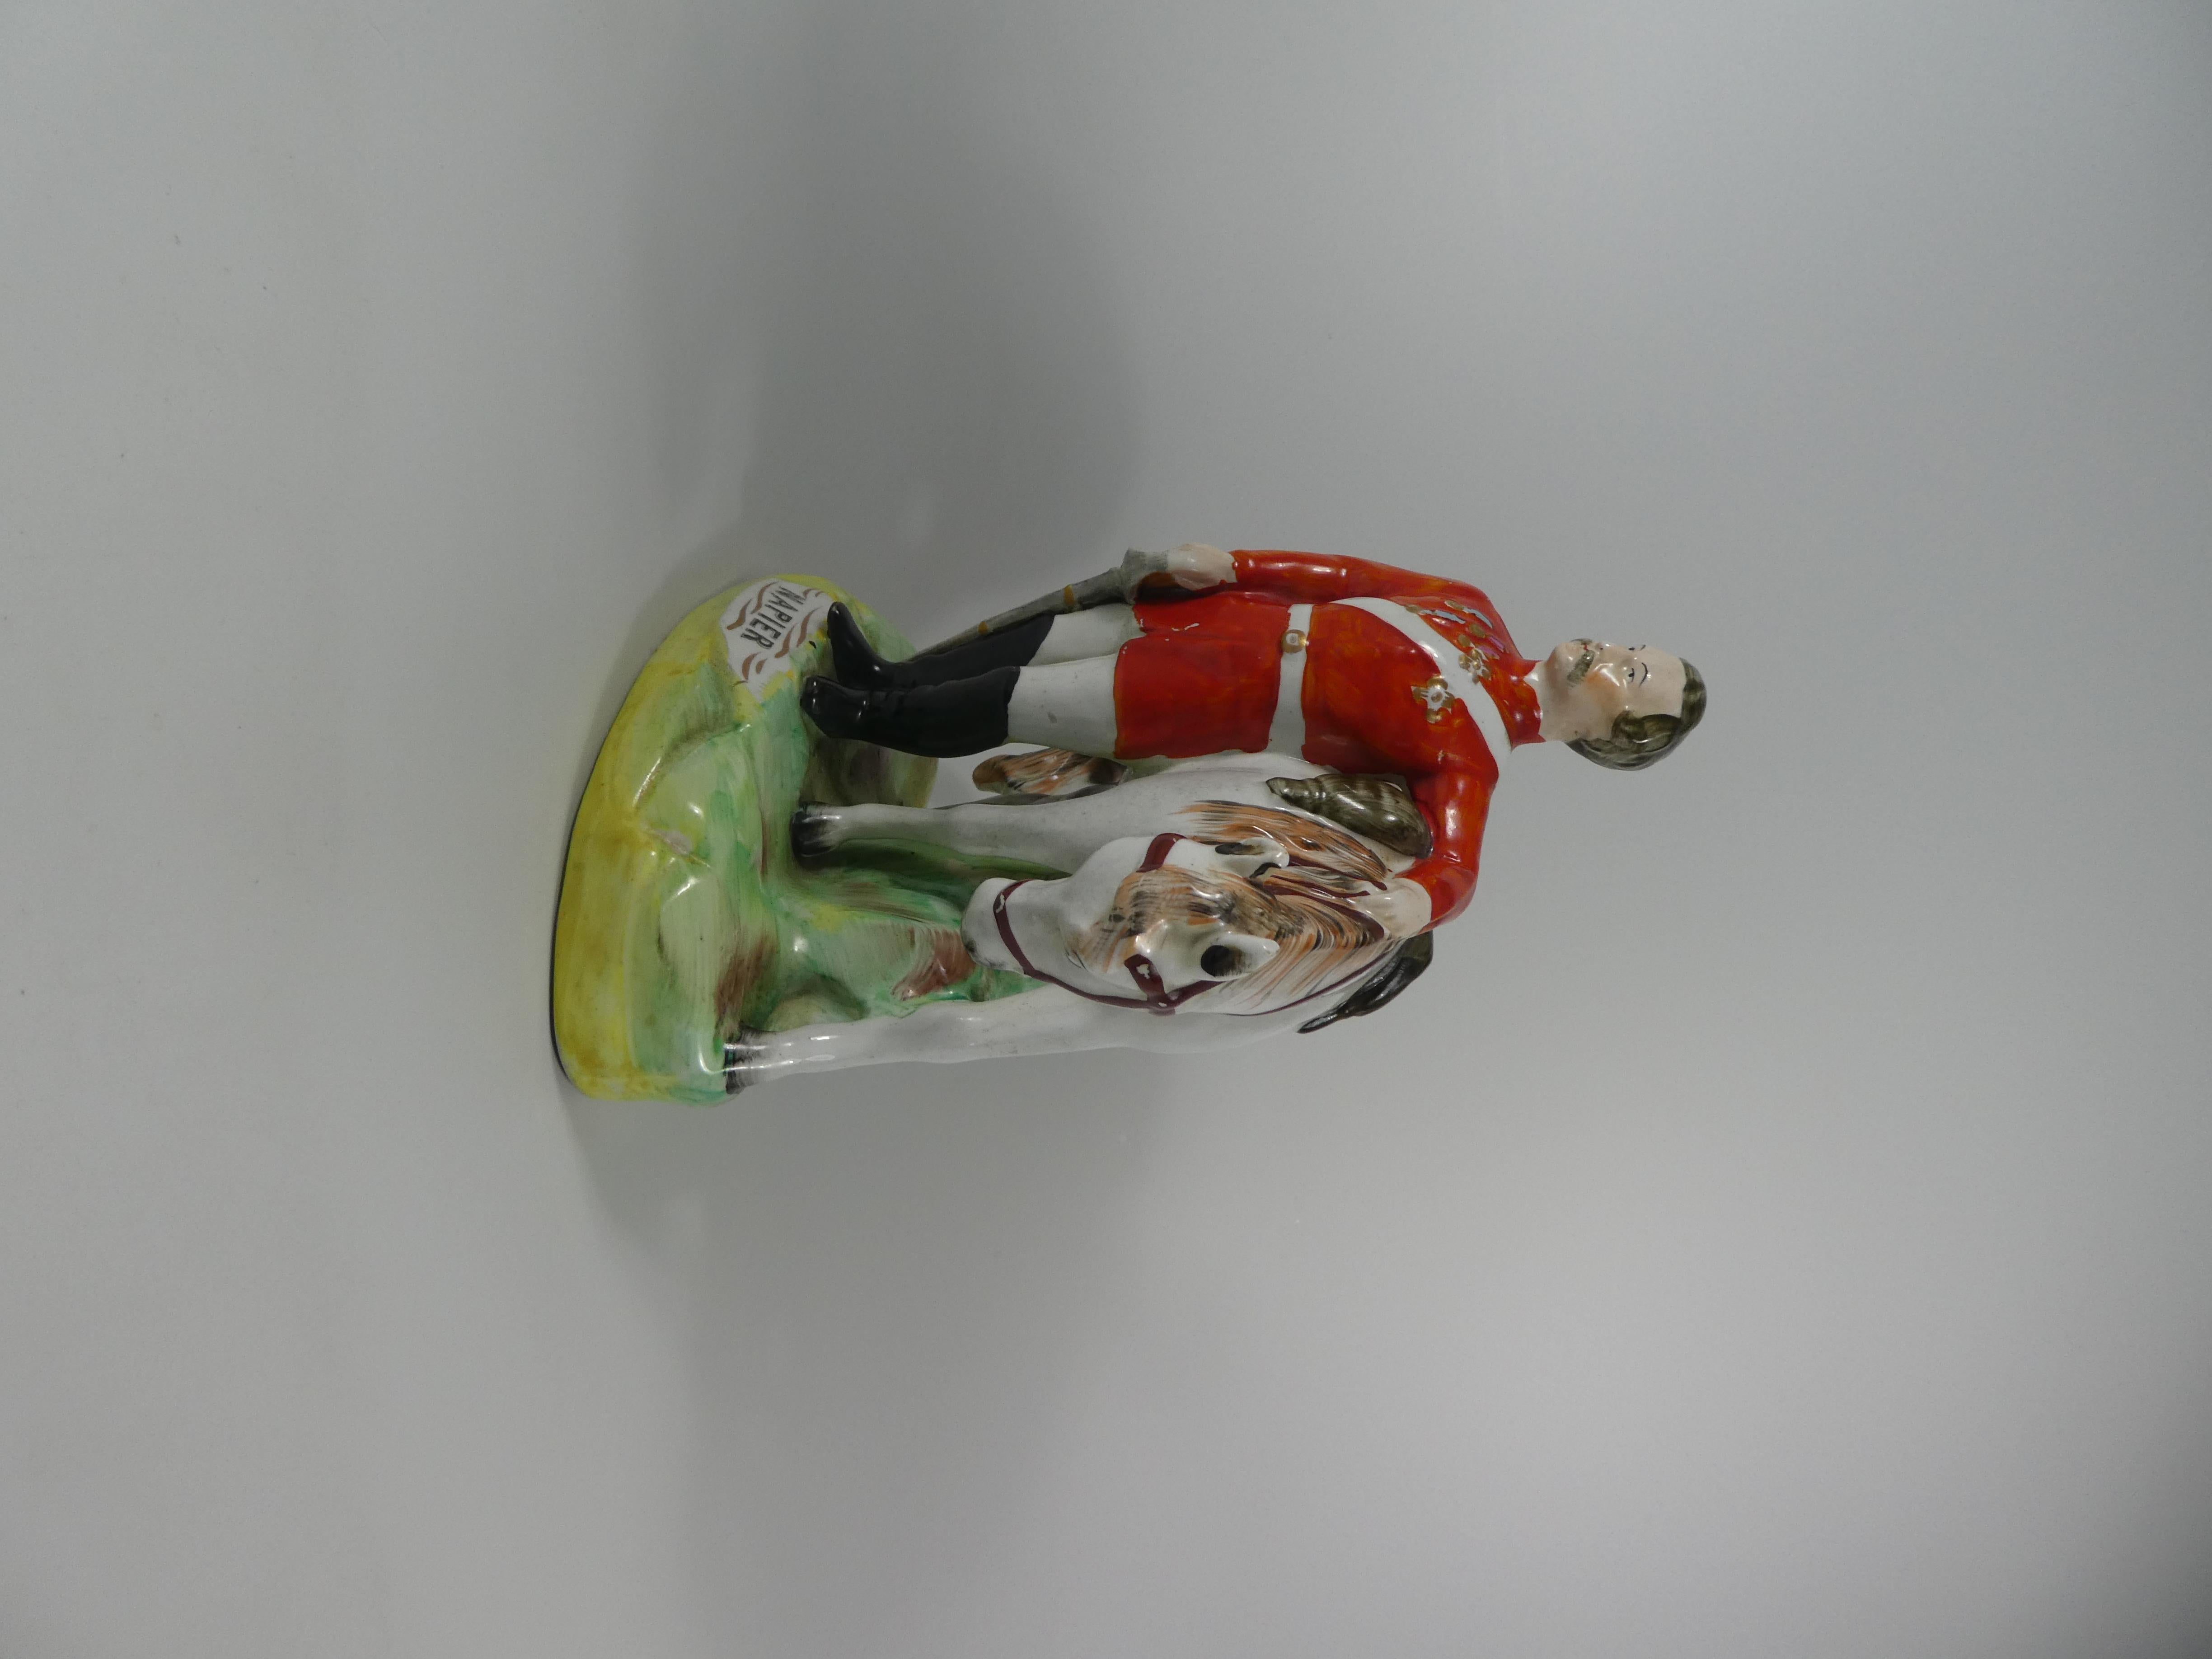 Fired Staffordshire Pottery Group General ‘Napier’, circa 1860